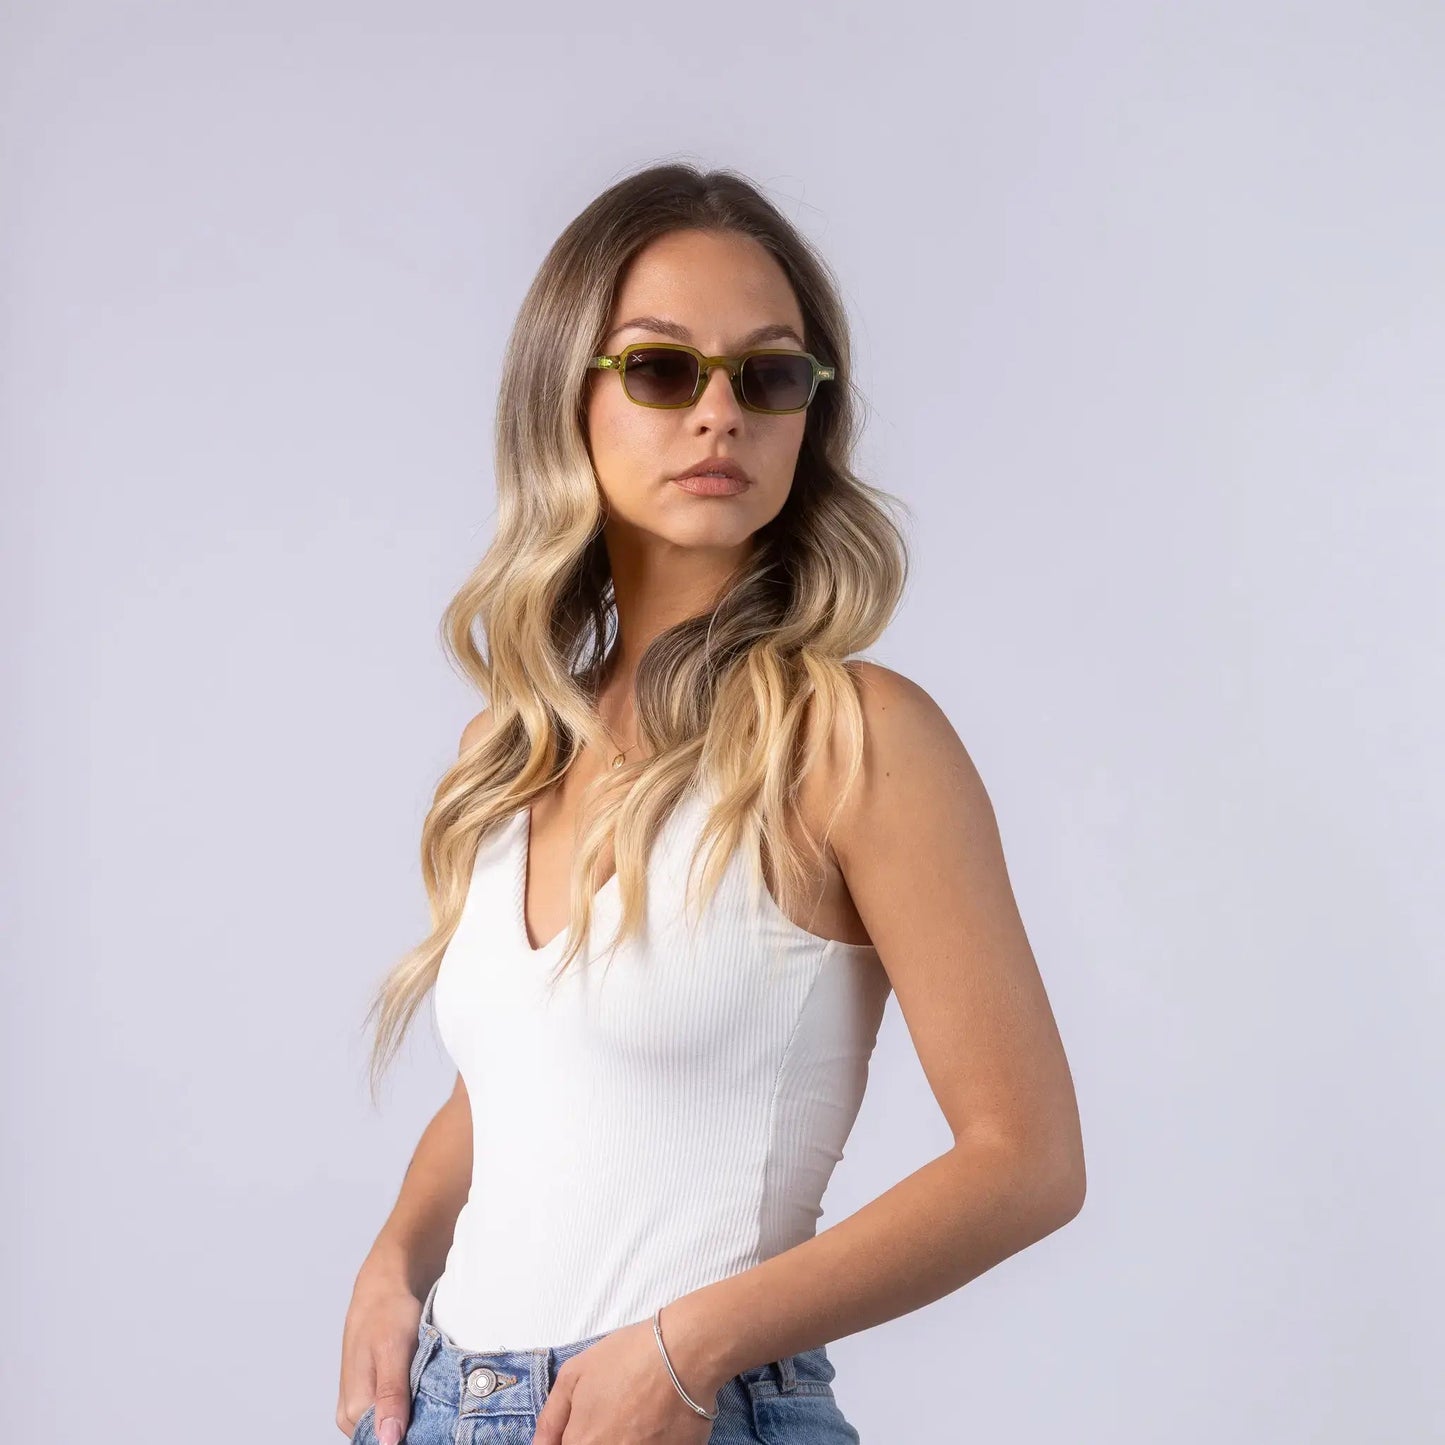 A female model wearing Exposure Sunglasses polarized sunglasses with green frames and tinted lenses, posing against a white background.